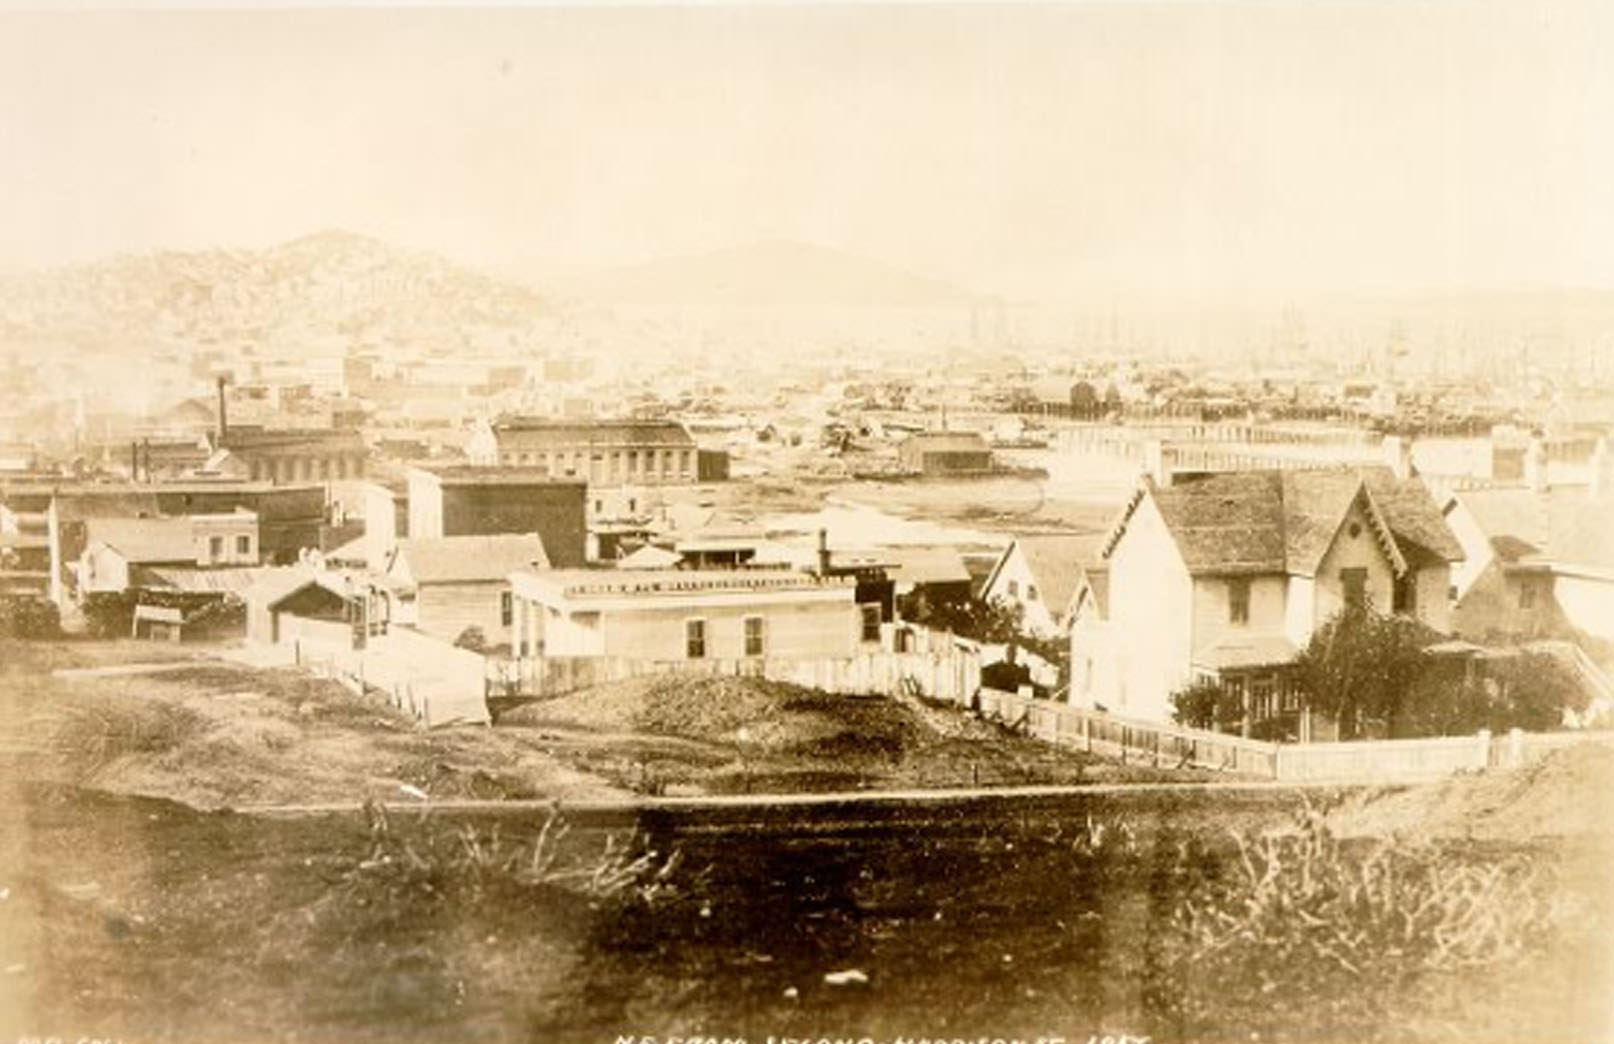 View of San Francisco looking northeast from Second and Harrison streets, 1856